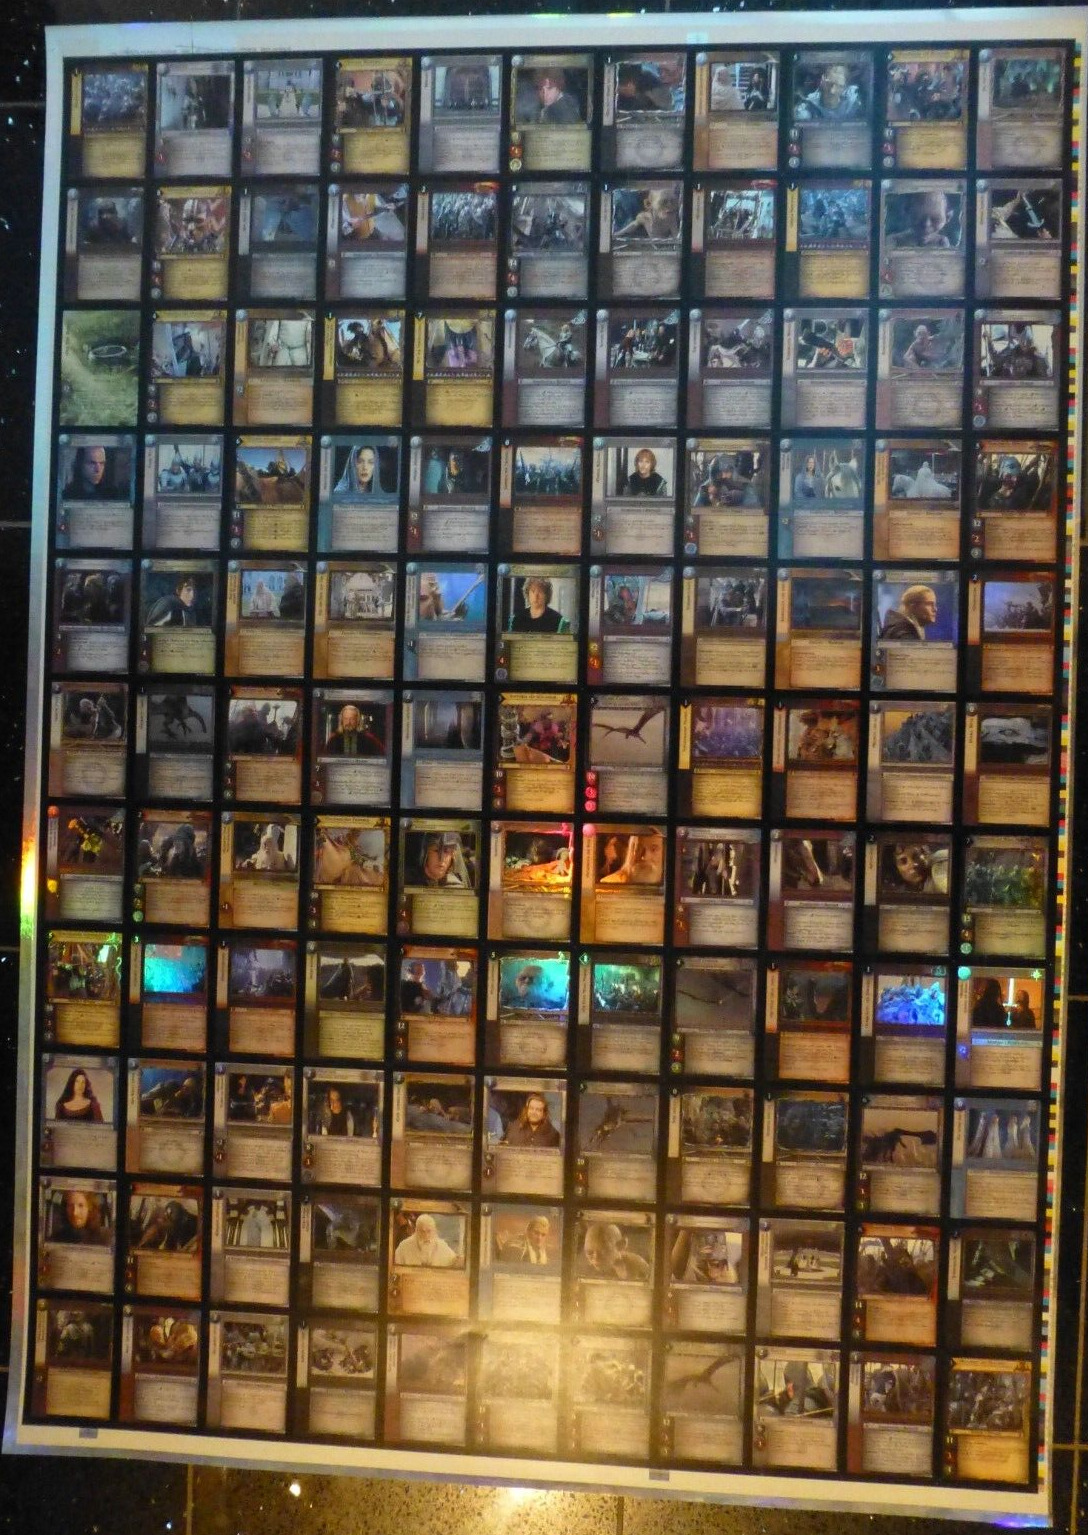 TCG 3 / Lord of the Rings Spread / Uncut Sheet The Return of the King Rare